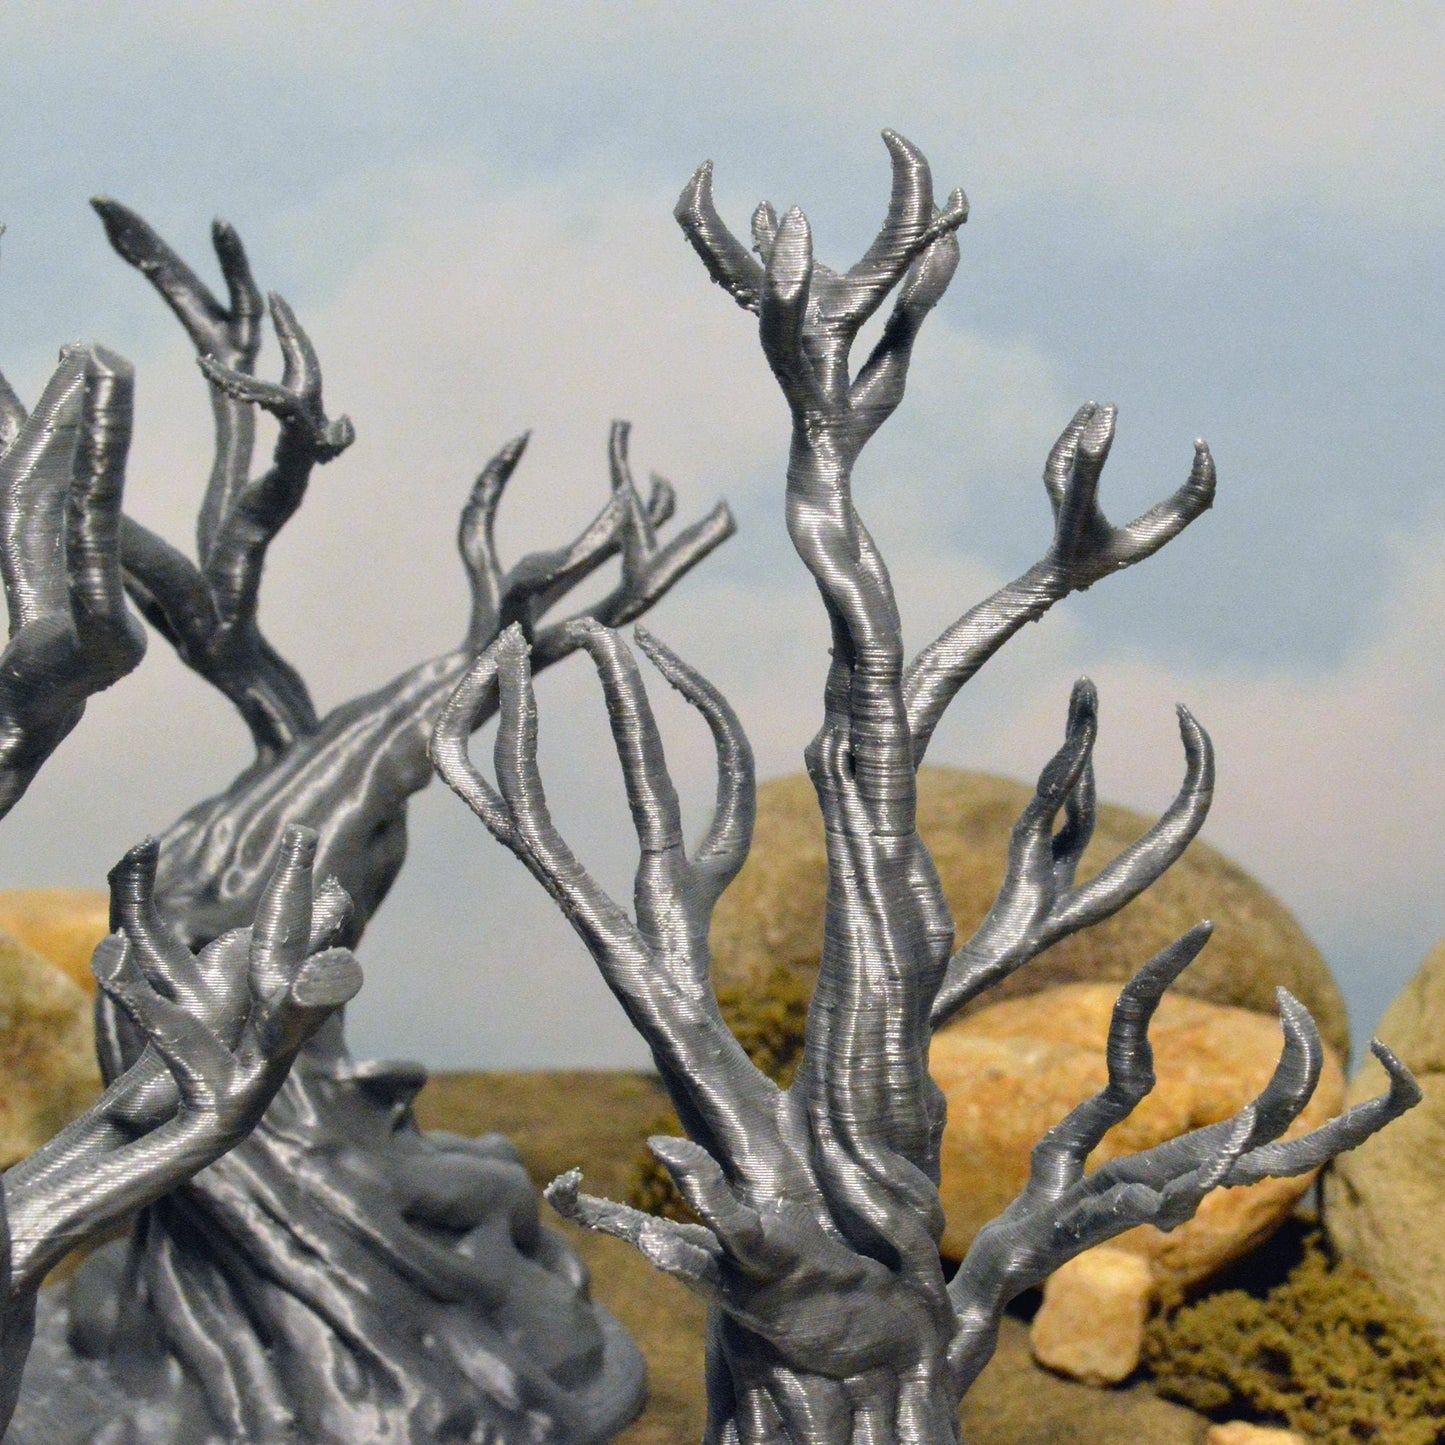 Dead Tree Forest 15mm 20mm 28mm 32mm for D&D Terrain, Leafless Trees and Stumps for DnD Warhammer Gaslands Fallout Post-Apocalyptic